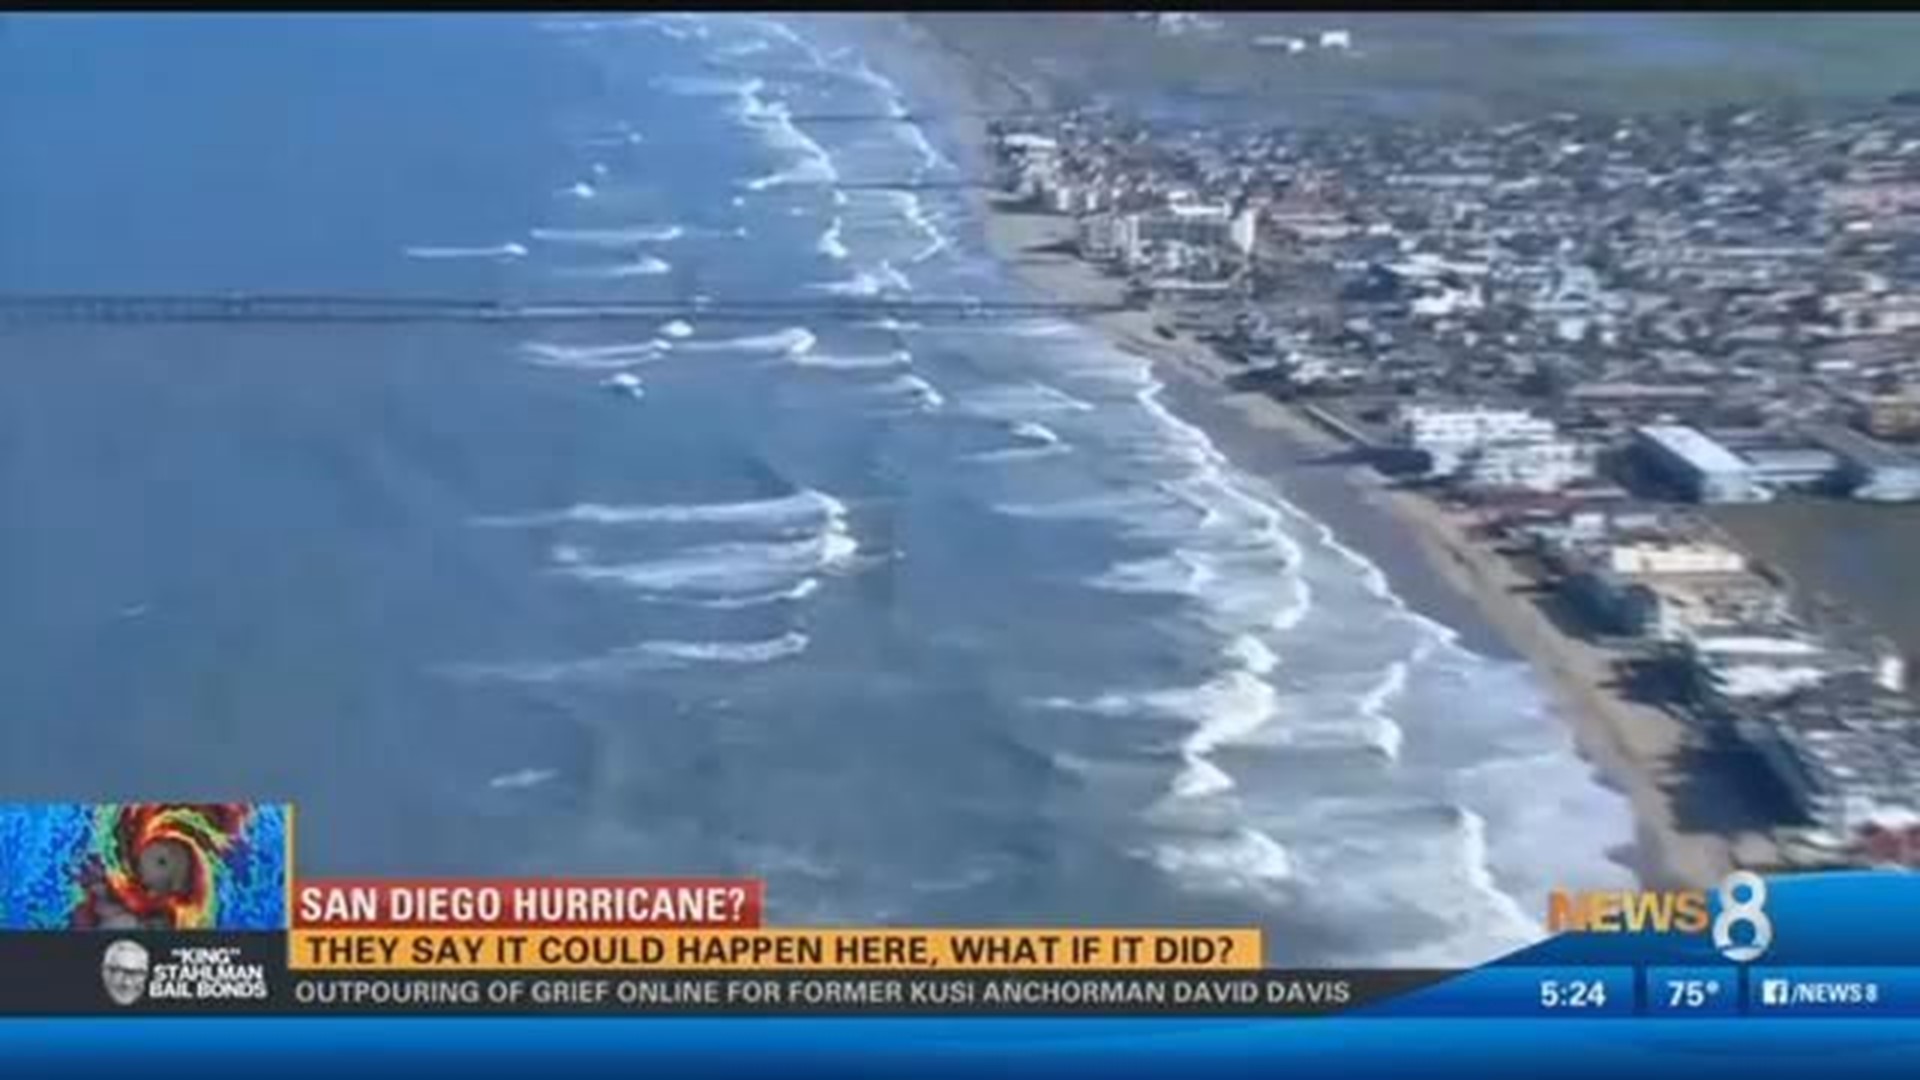 San Diego hurricane? They say it could happen, what if it did?